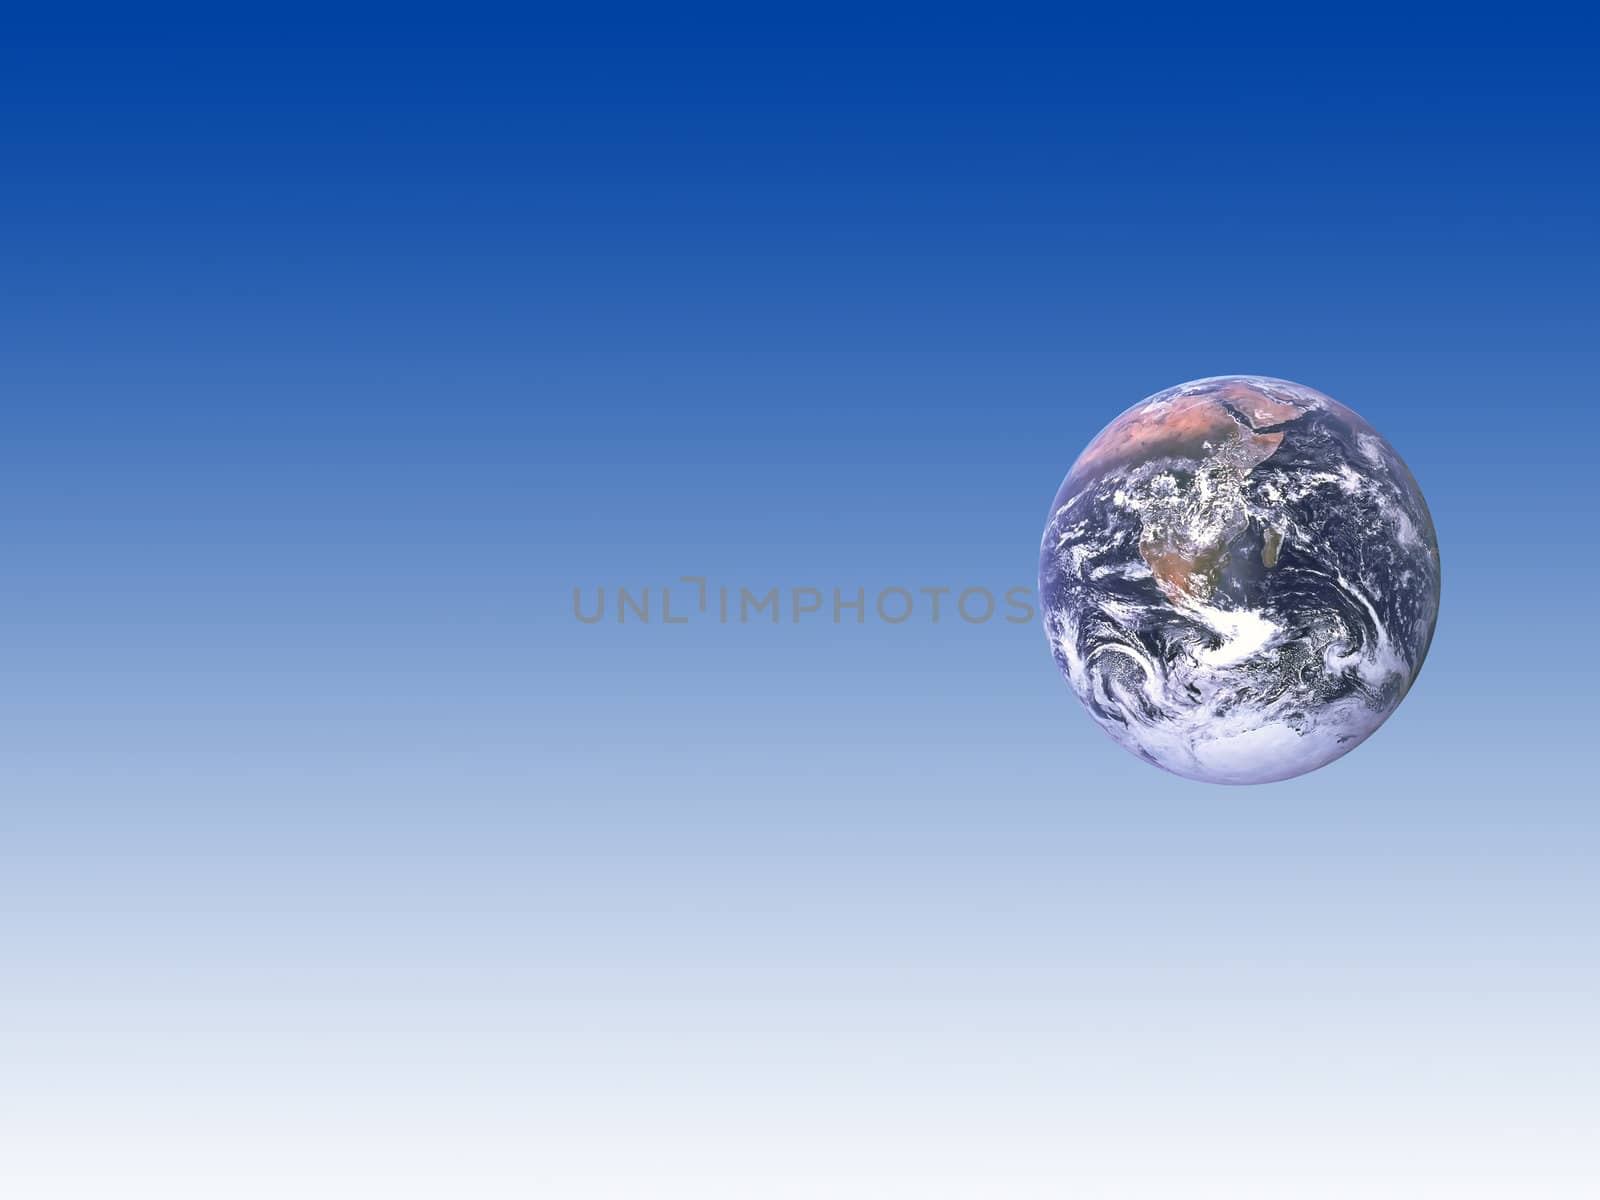 The Earth over sky-blue background